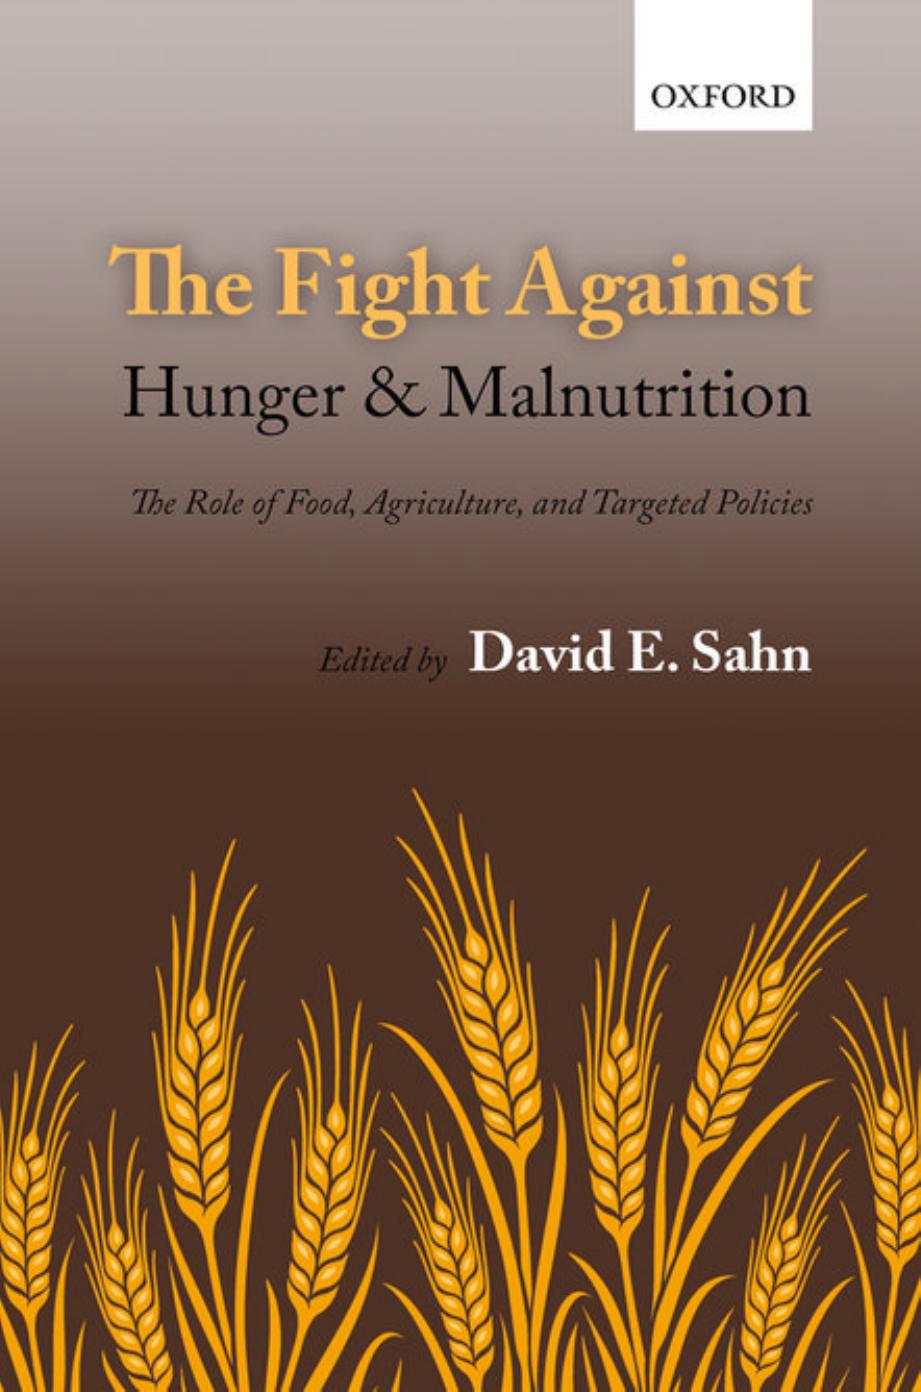 The Fight Against Hunger and Malnutrition: The Role of Food, Agriculture, and Targeted Policies